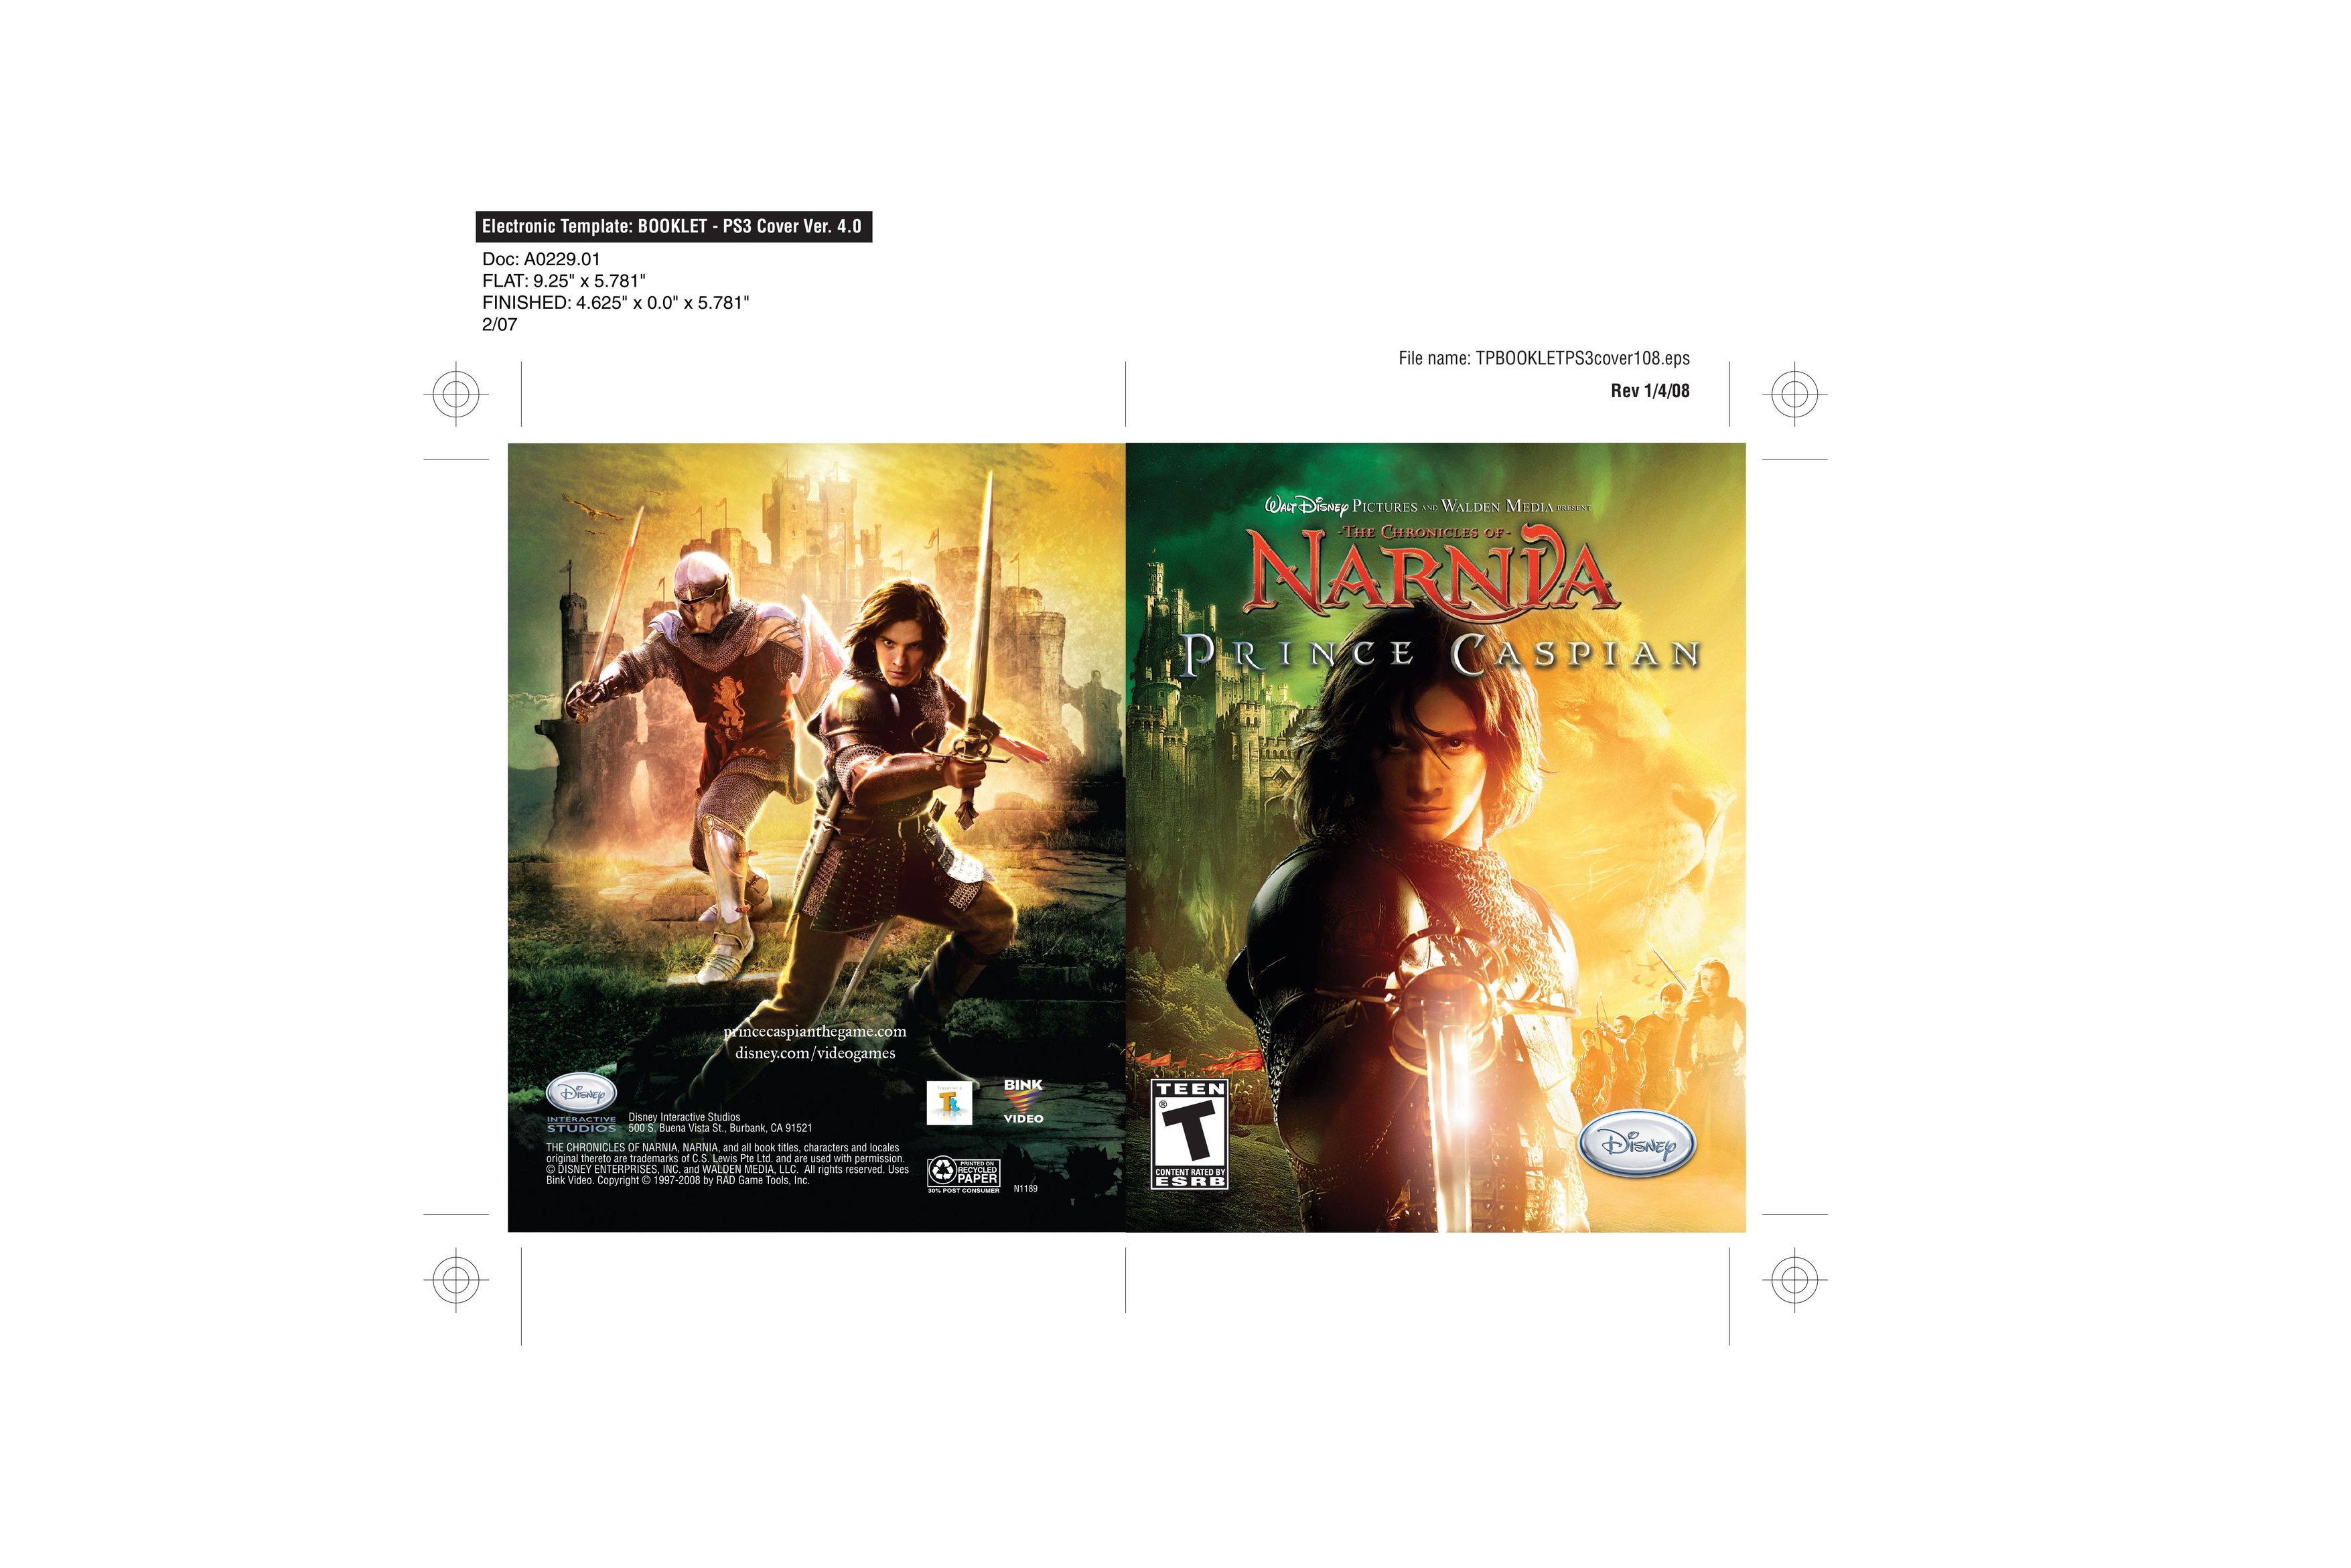 Disney Interactive Studios The Chronicles of Narnia: Prince Caspian Handheld Game System User Manual